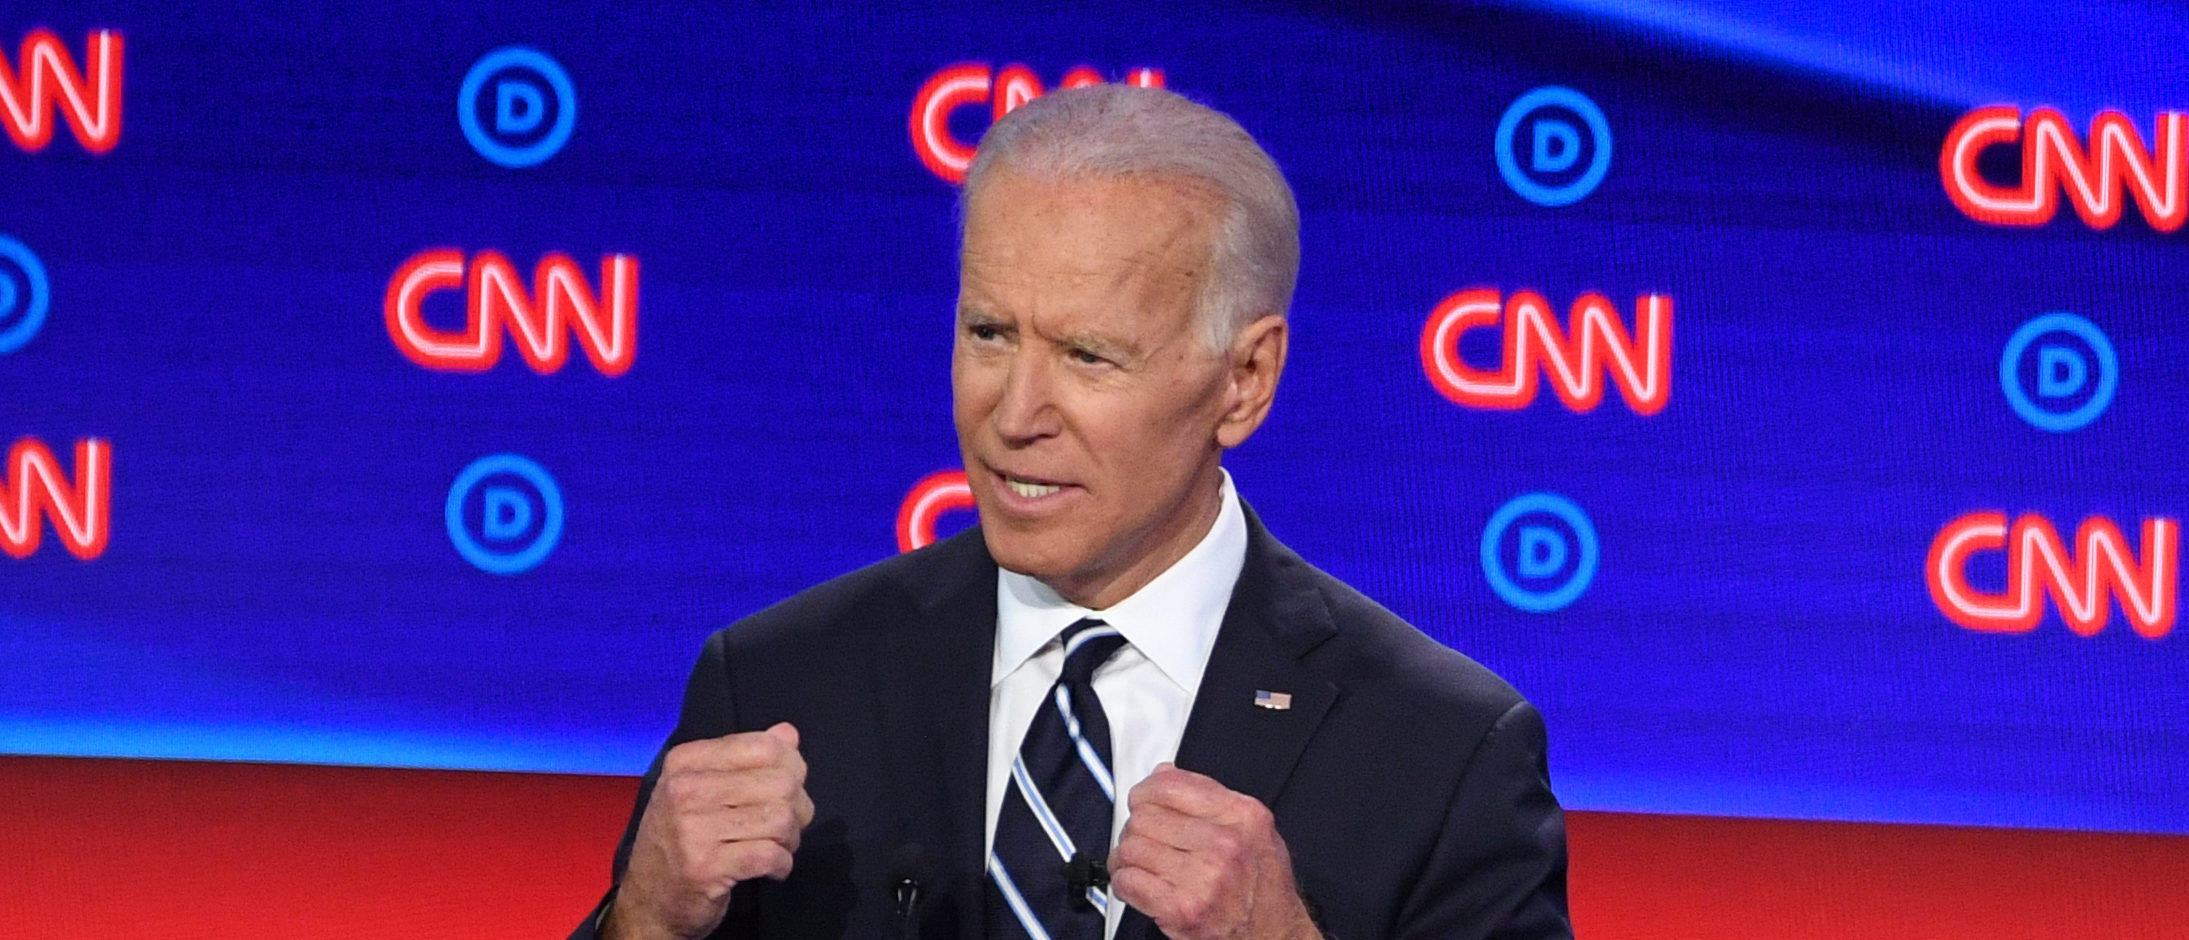 Democratic presidential hopeful Former Vice President Joe Biden speaks during the second round of the second Democratic primary debate of the 2020 presidential campaign season hosted by CNN at the Fox Theatre in Detroit, Michigan on July 31, 2019. (JIM WATSON/AFP via Getty Images)